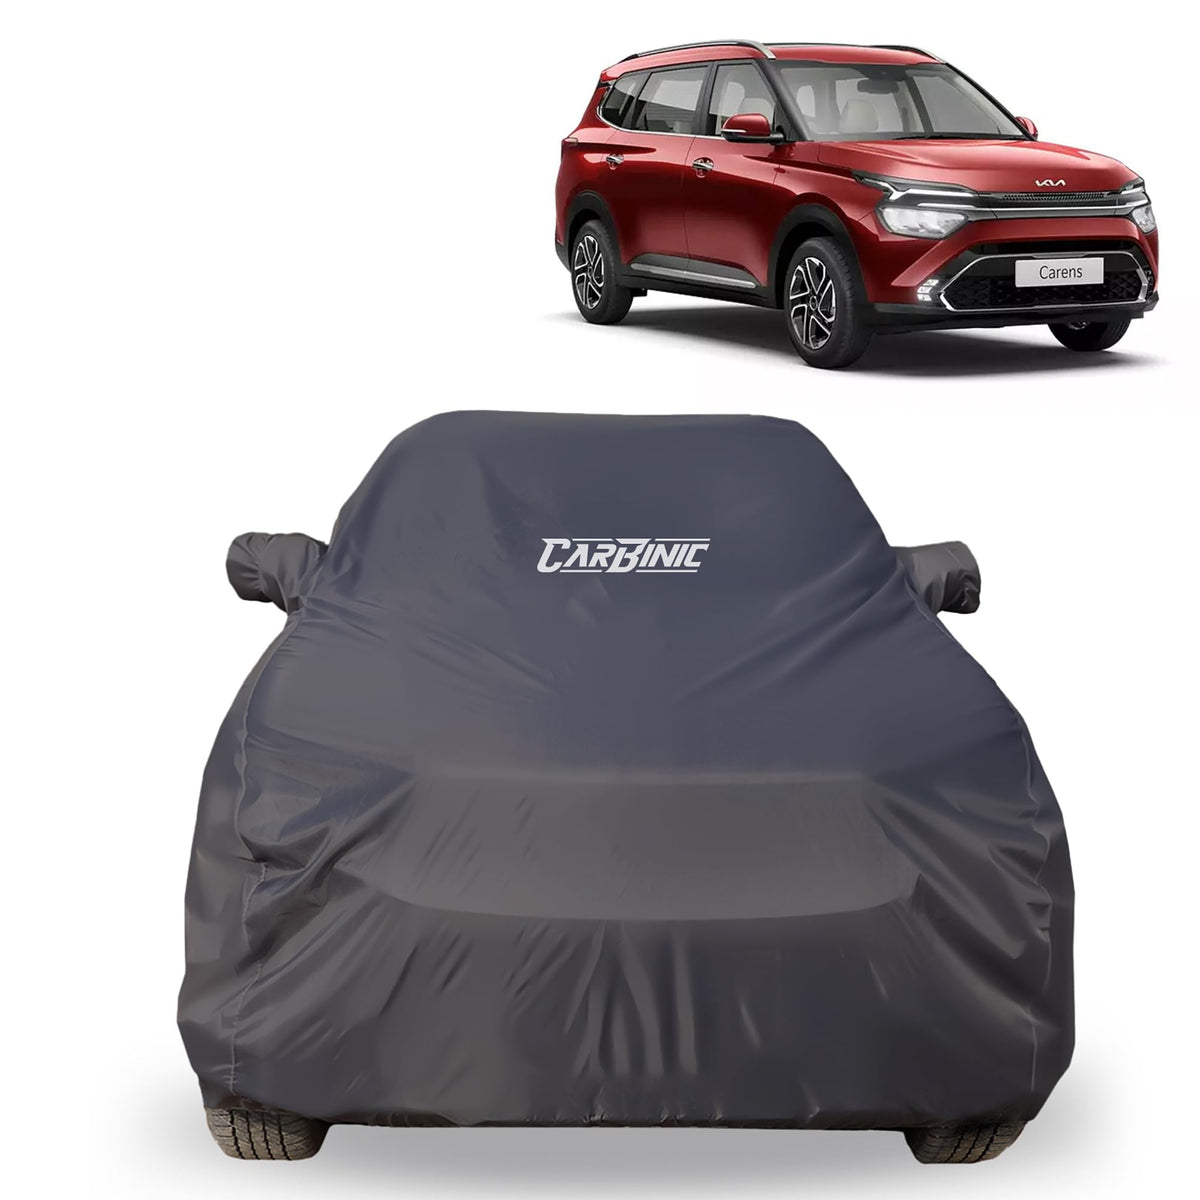 CARBINIC Car Body Cover for MG Hector 2022 | Water Resistant, UV Protection Car Cover | Scratchproof Body Shield | All-Weather Cover | Mirror Pocket & Antenna | Car Accessories Dusk Grey